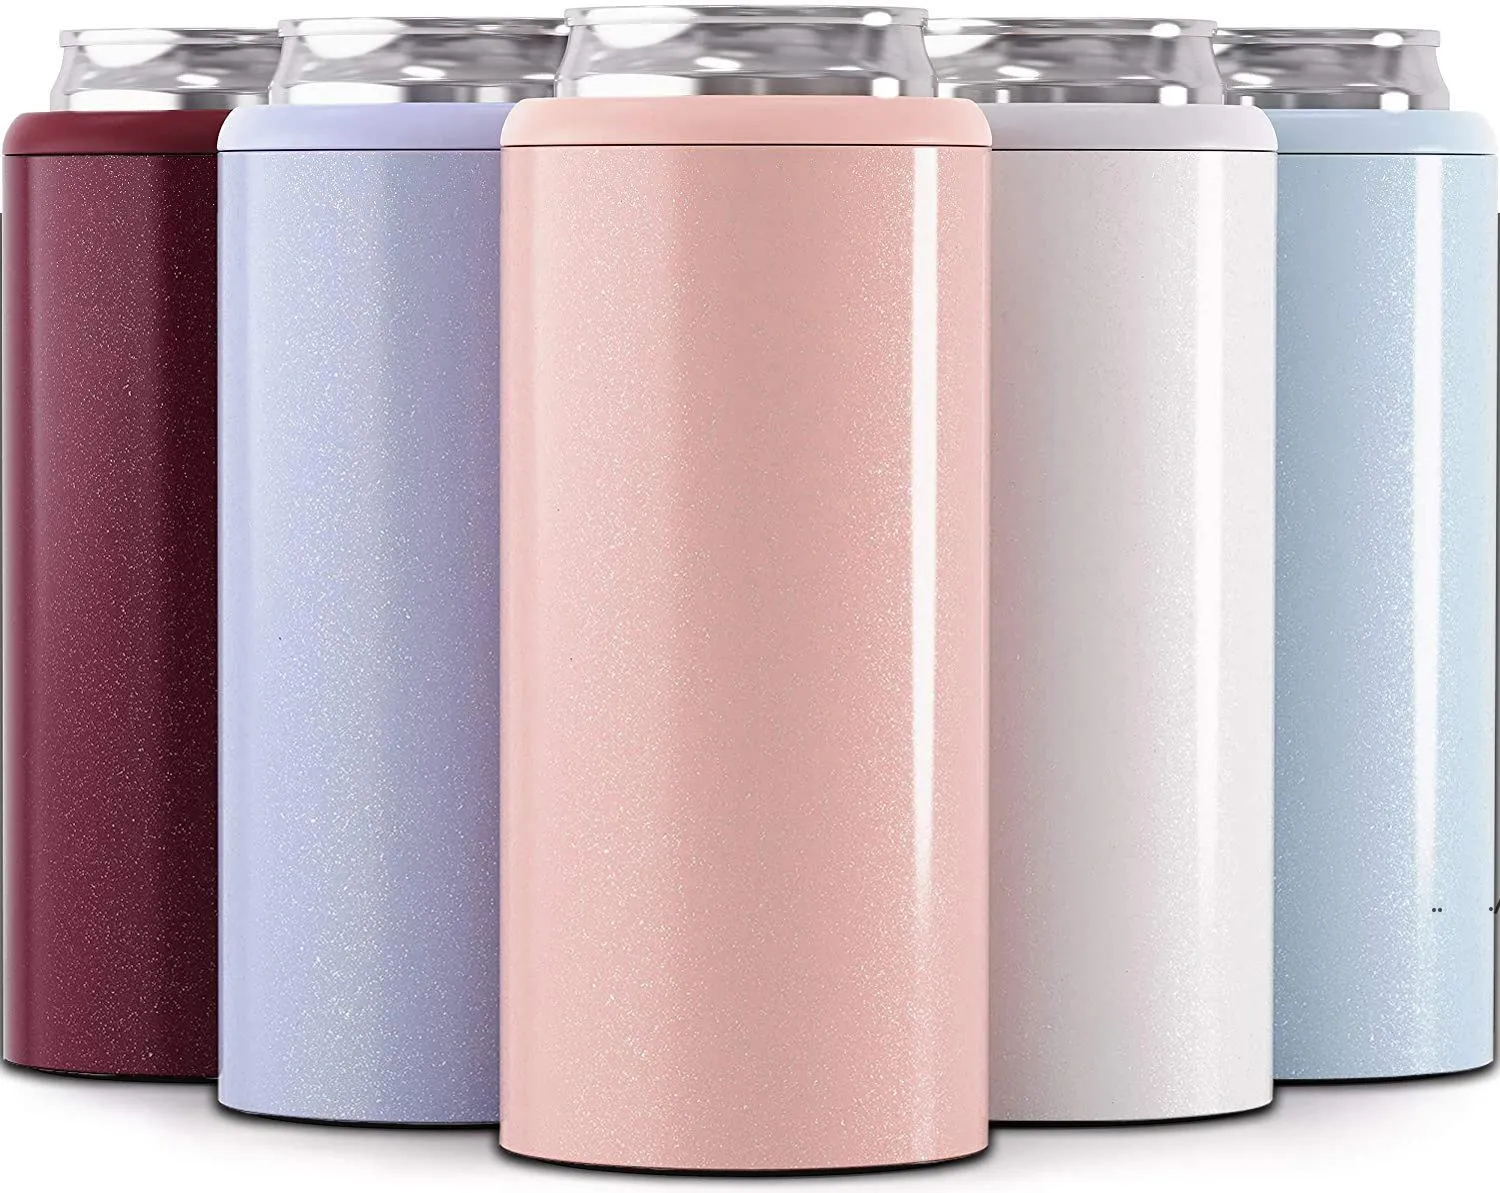 New Stainless Steel Can tumblers Sleeve Skinny Cans Cooler Slim Beer Hard Vacuum Insulated Drink Holder sea shipping EWB7702